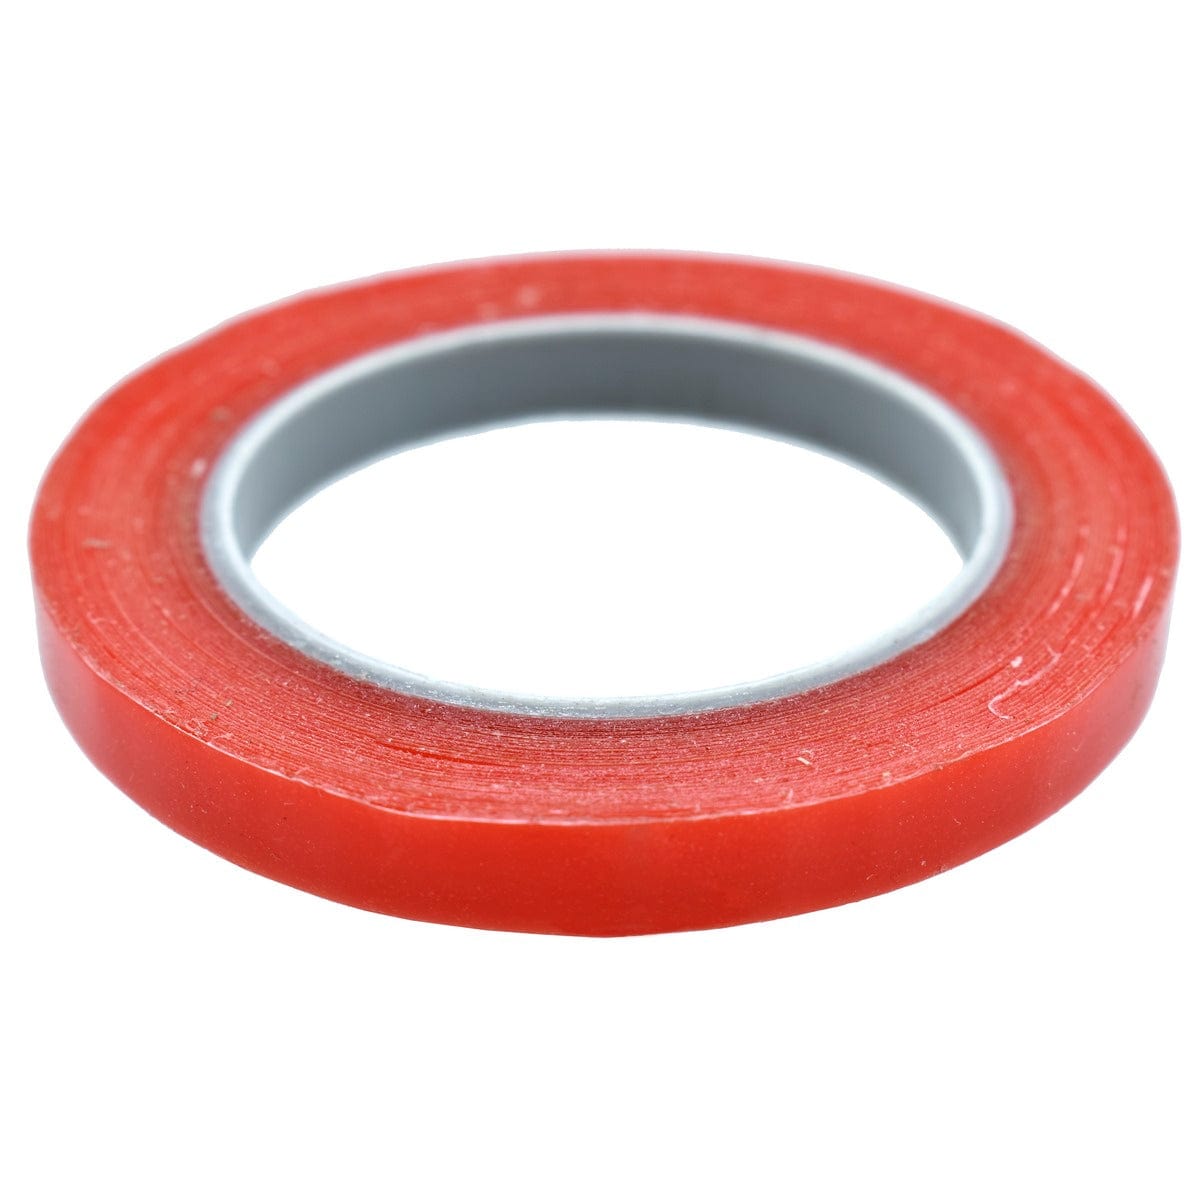 jags-mumbai Two way tape Tape Double Sided Red 5Mtr 6mm